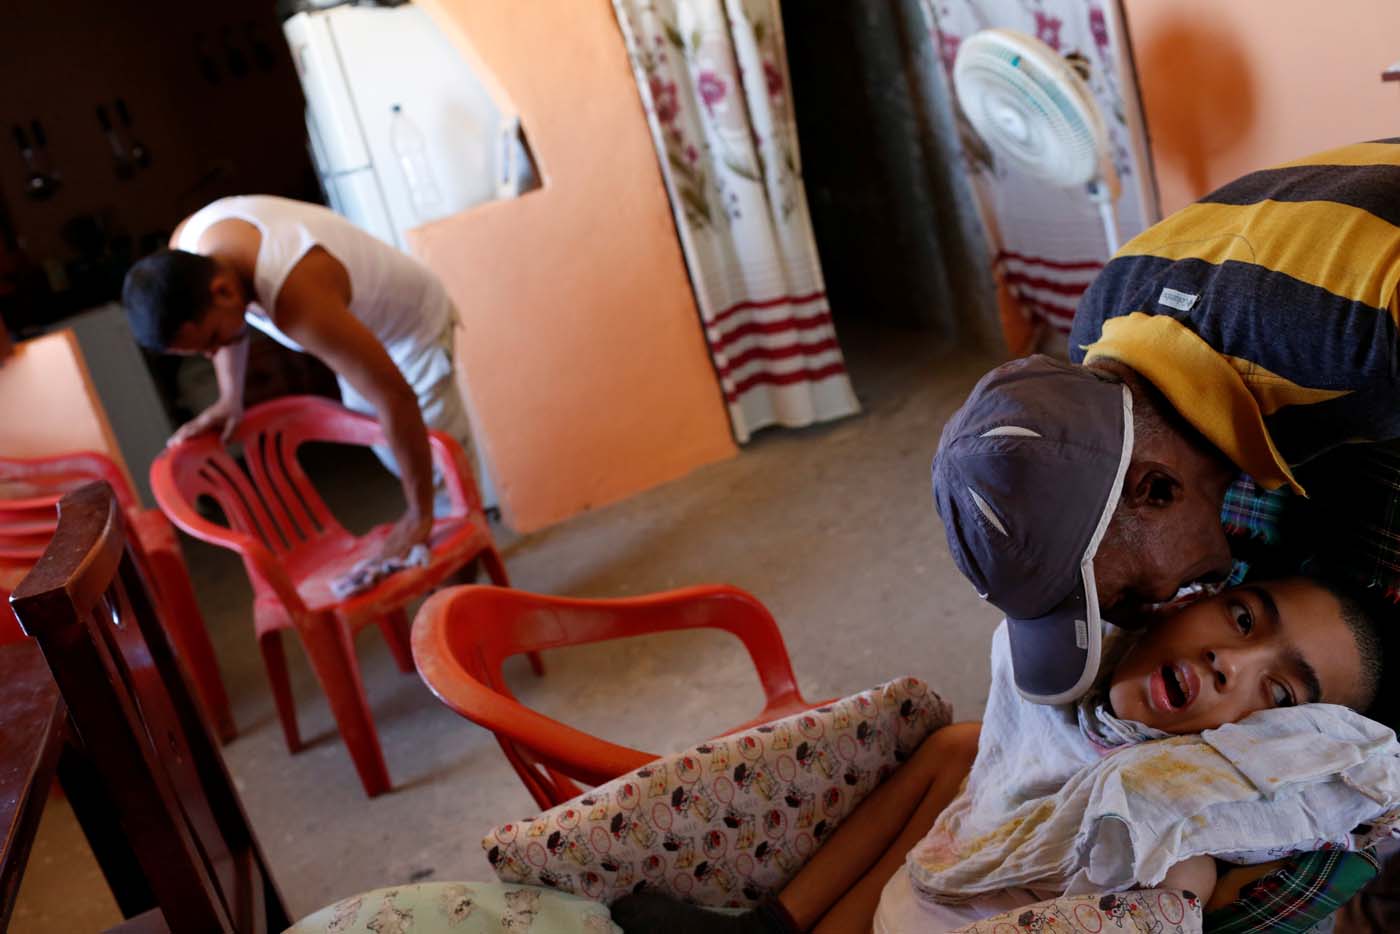 Jose Gregorio Anton (R), 11, a neurological patient being treated with anticonvulsants, is kissed by a neighbour at his house in La Guaira, Venezuela February 15, 2017. REUTERS/Carlos Garcia Rawlins   SEARCH "EPILEPSY CARACAS" FOR THIS STORY. SEARCH "WIDER IMAGE" FOR ALL STORIES.